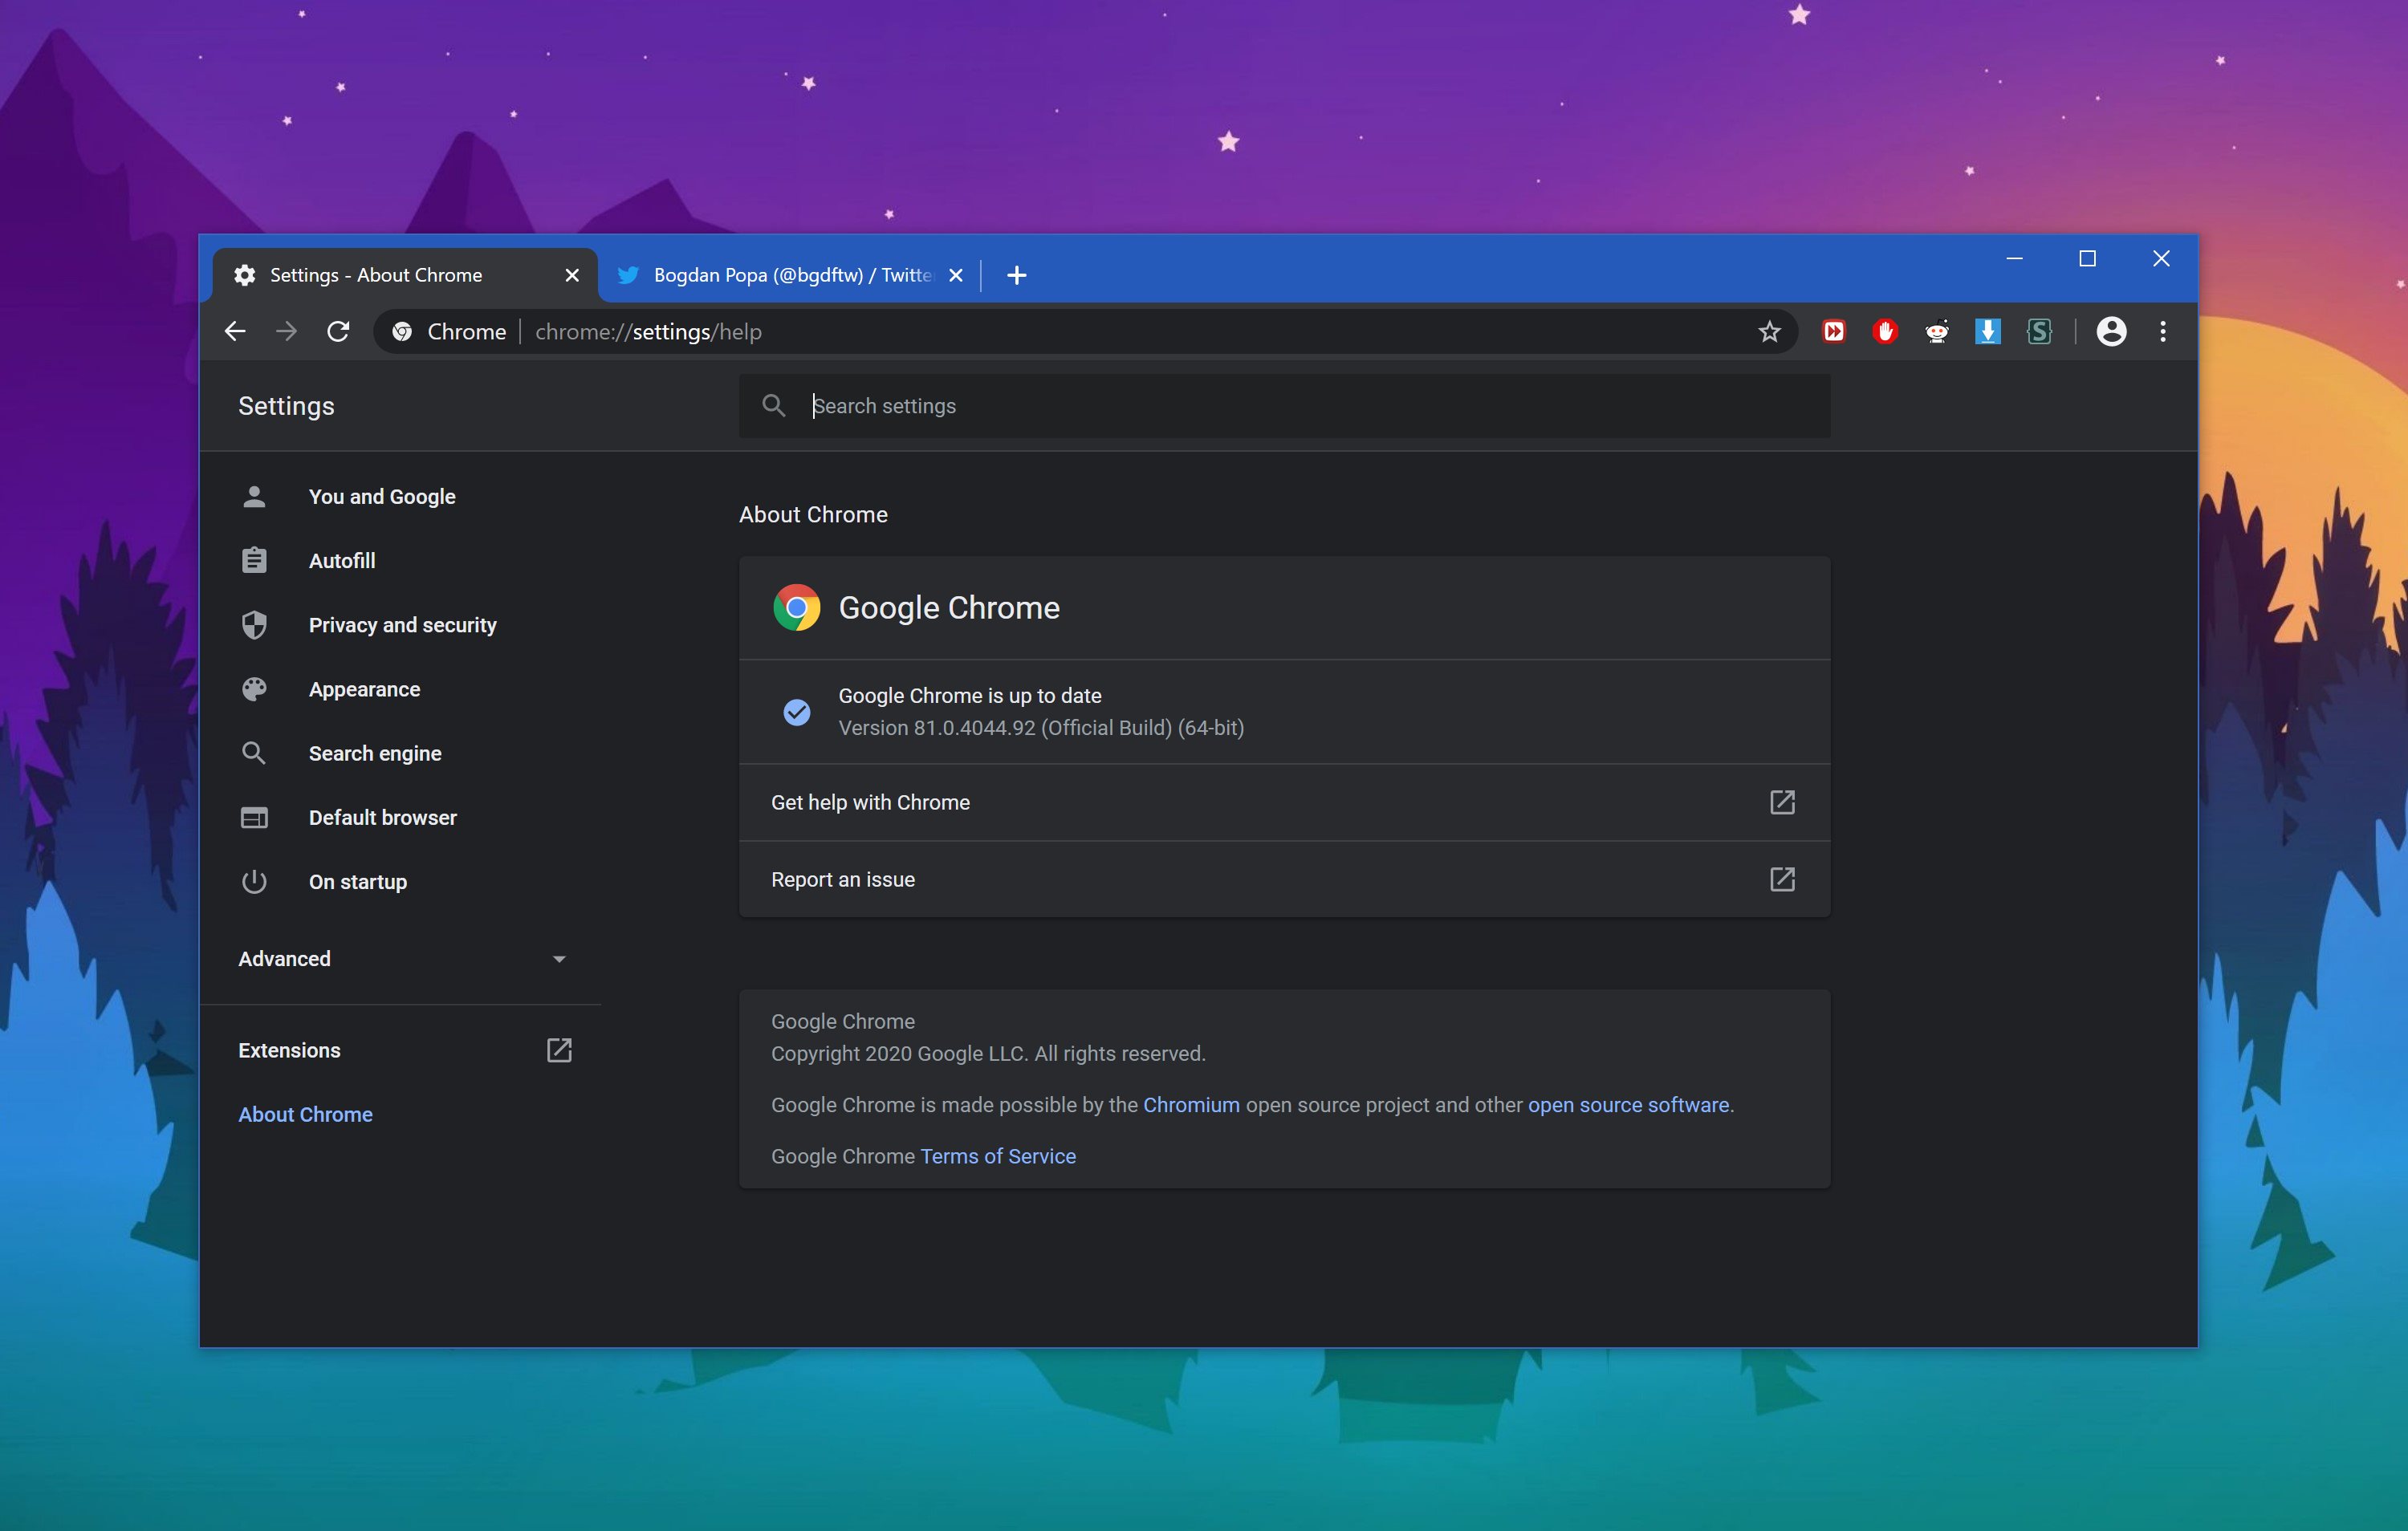 Google Chrome 81 Now Available for Download on Linux, Windows, and Mac